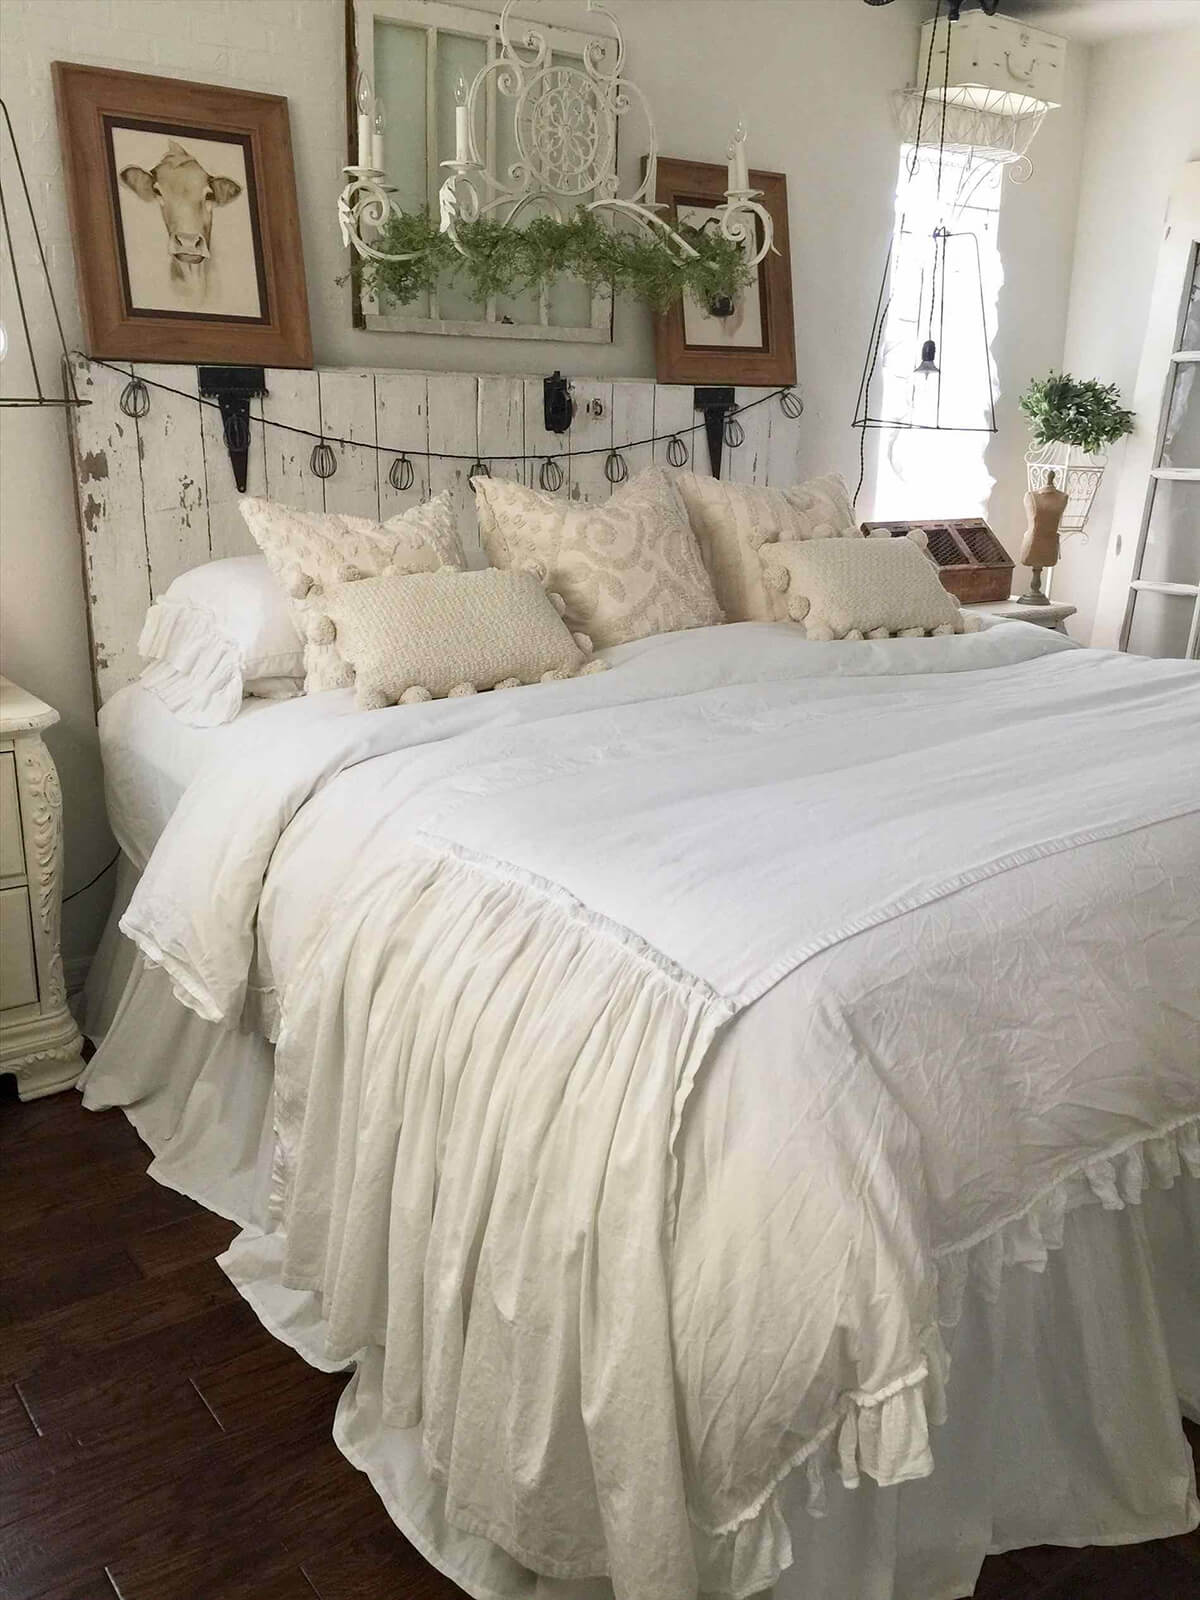 26 Best Rustic Bedroom Decor Ideas and Designs for 2021